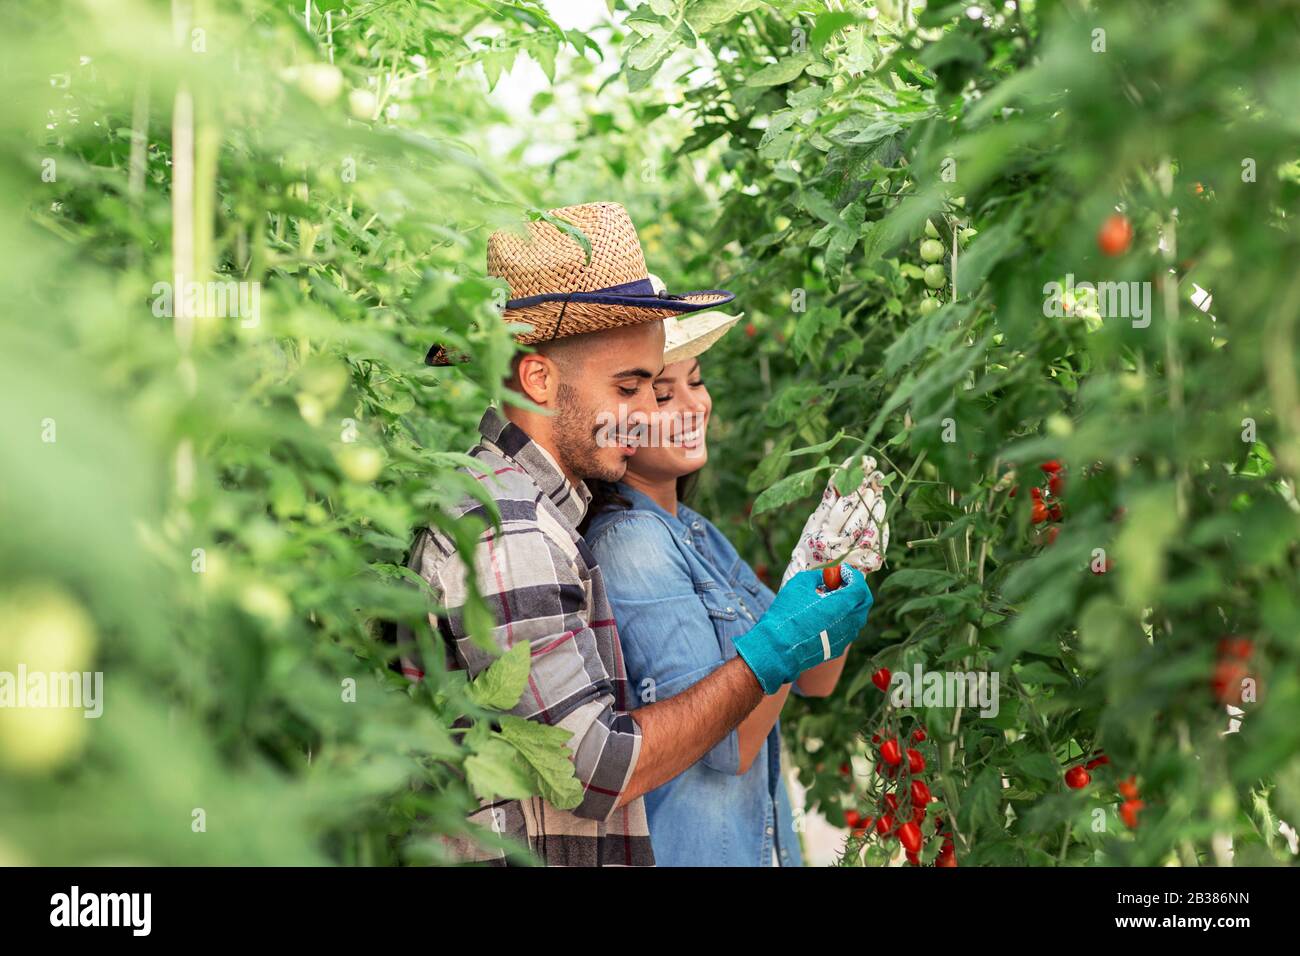 Two workers in green tomato plant farm Stock Photo